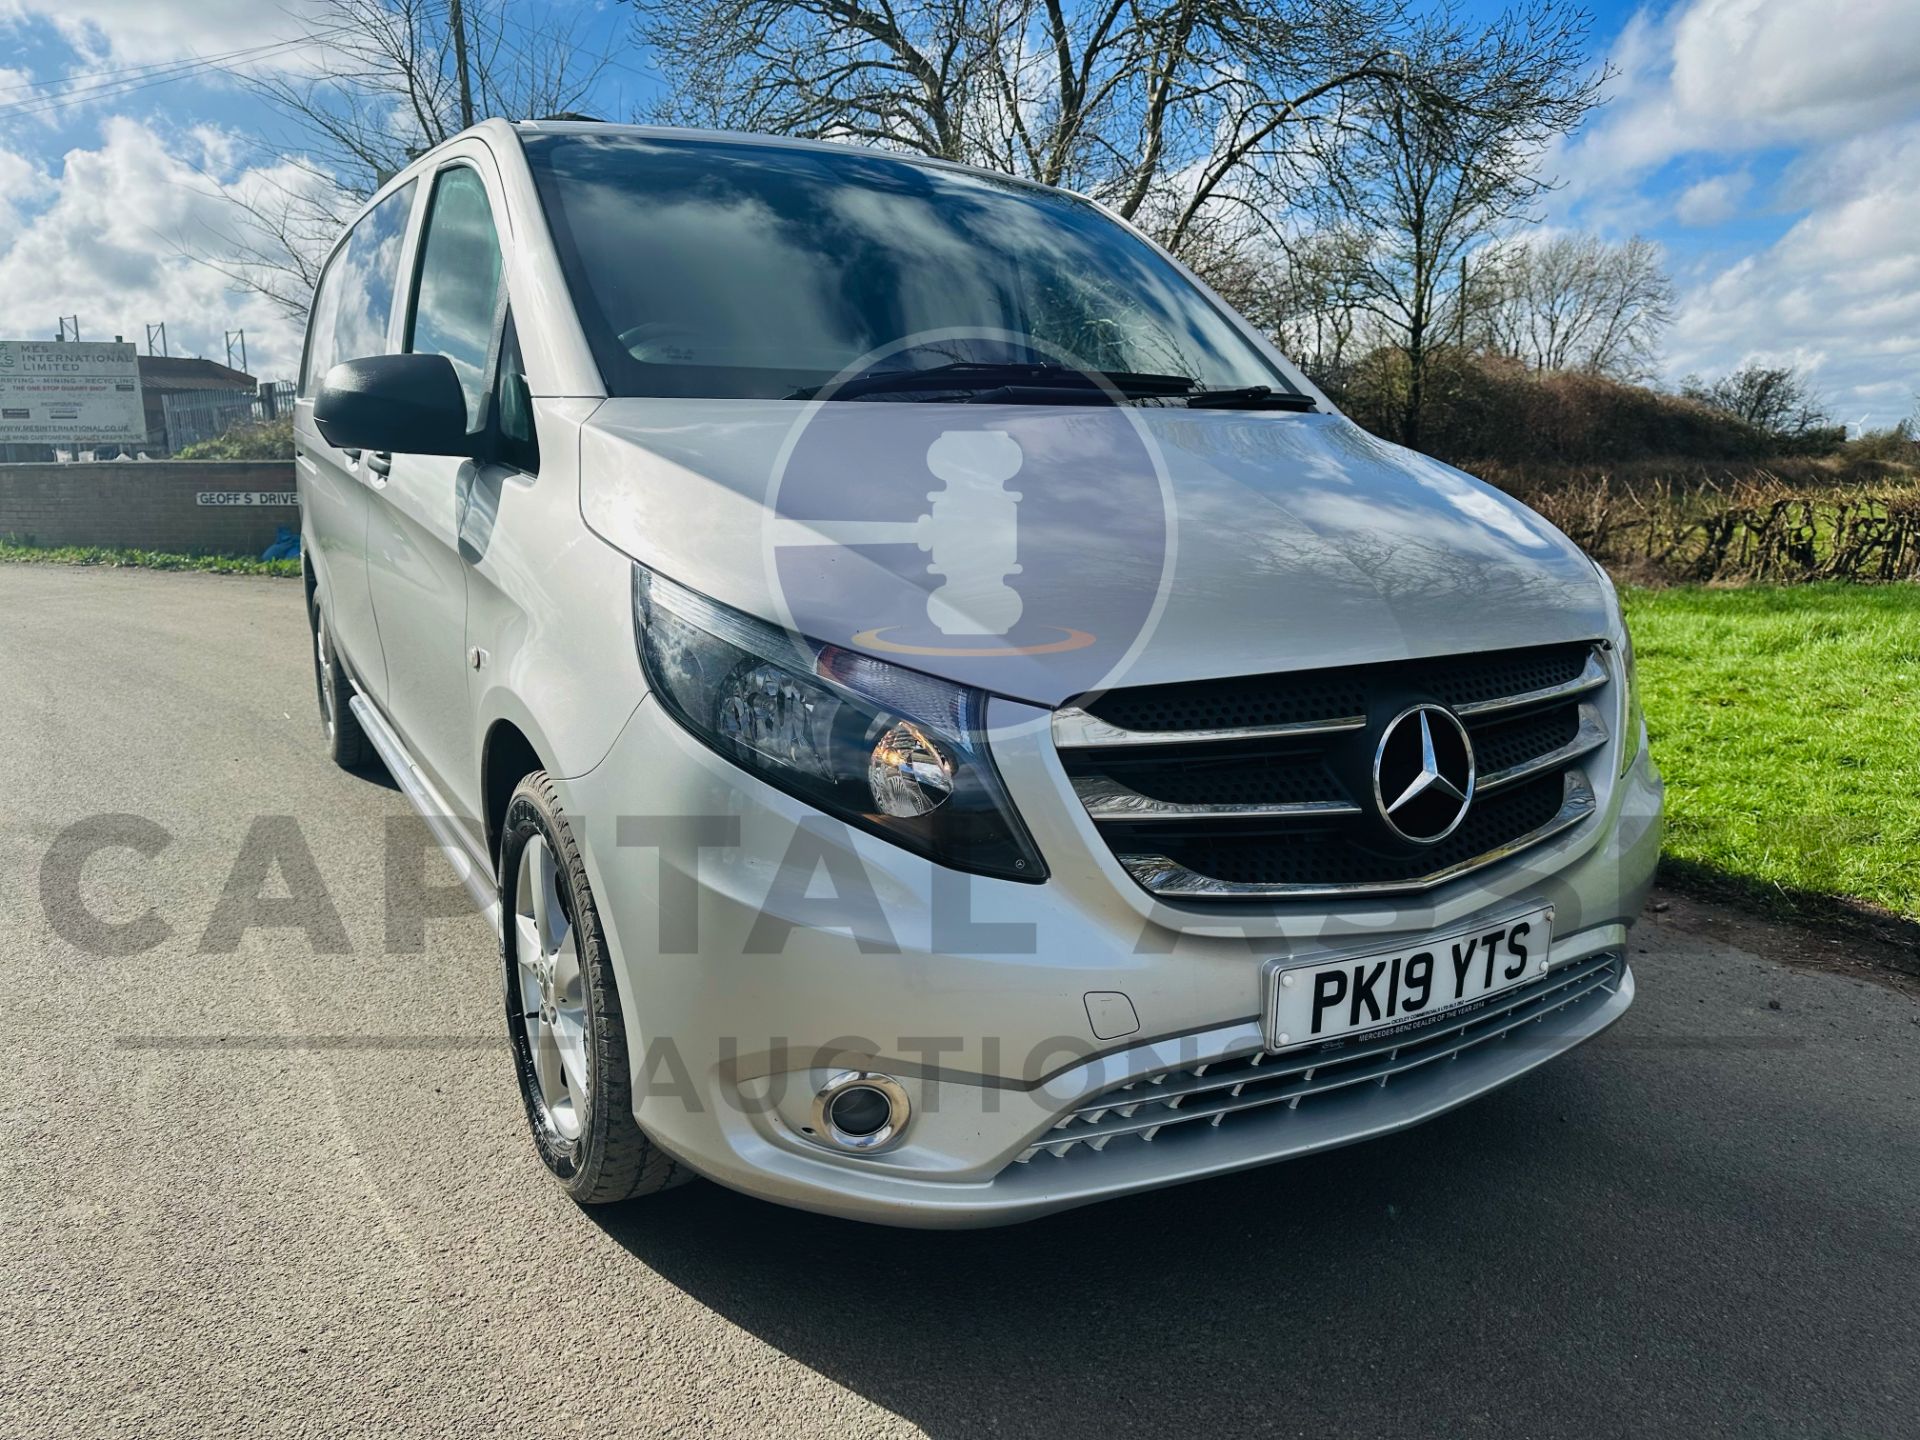 MERCEDES-BENZ VITO 119 CDI *SPORT "LWB DUALINER" 7G AUTOMATIC - 19 REG - ONLY 74K MILES - WOW!!! - Image 3 of 38